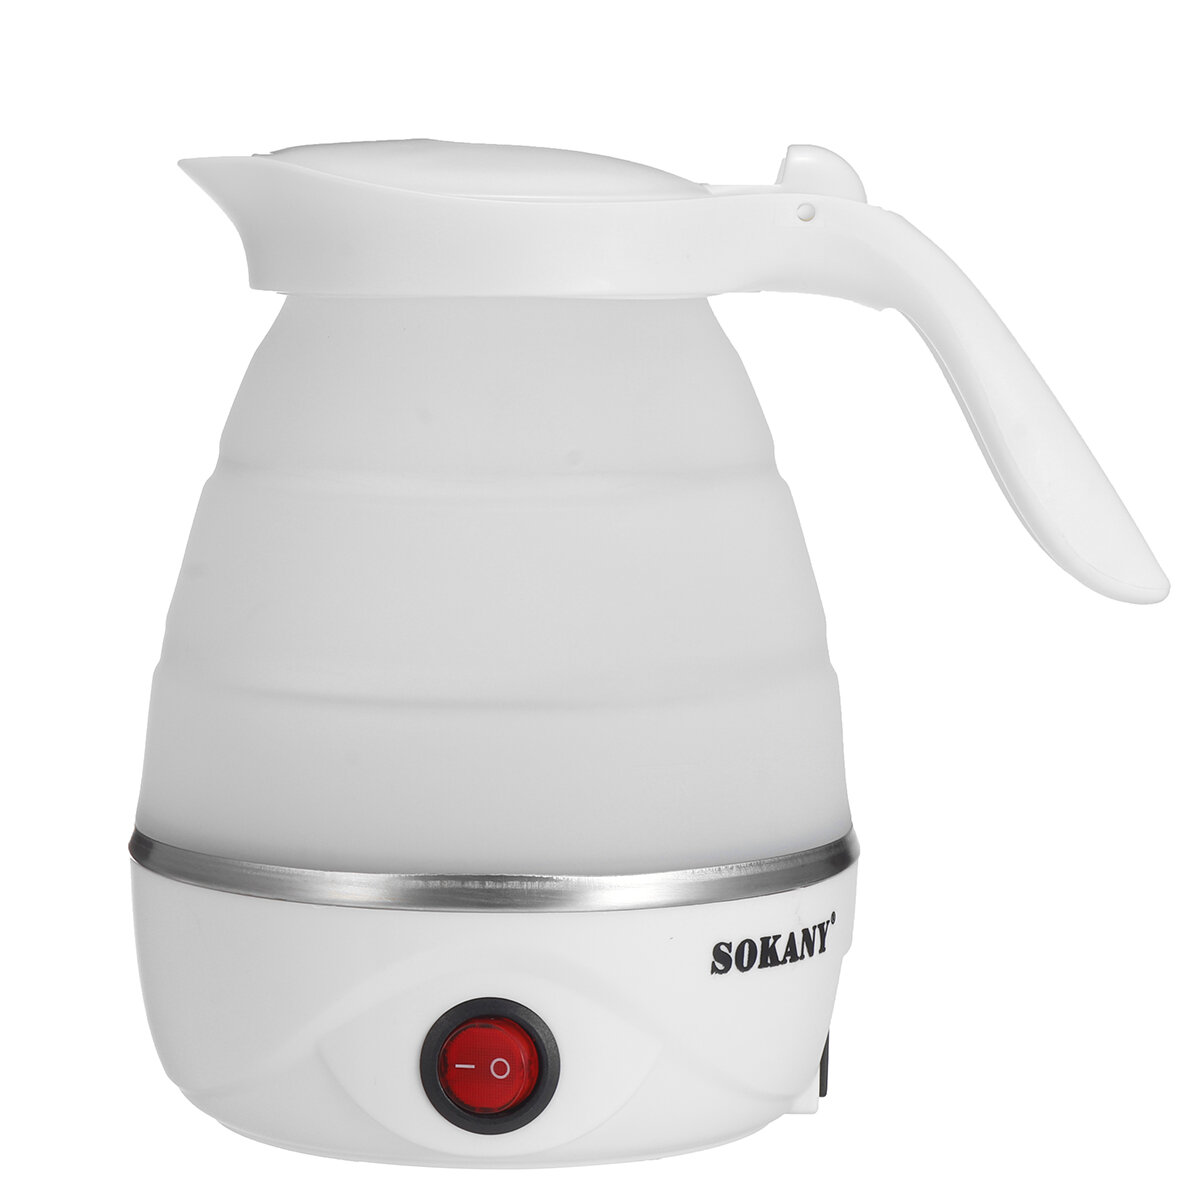 SOKANY 600W 700ml Compact Electric Kettle Silicone Foldable Portable Travel Hot Water Heating Boiler Tea Boiling Pot Hom